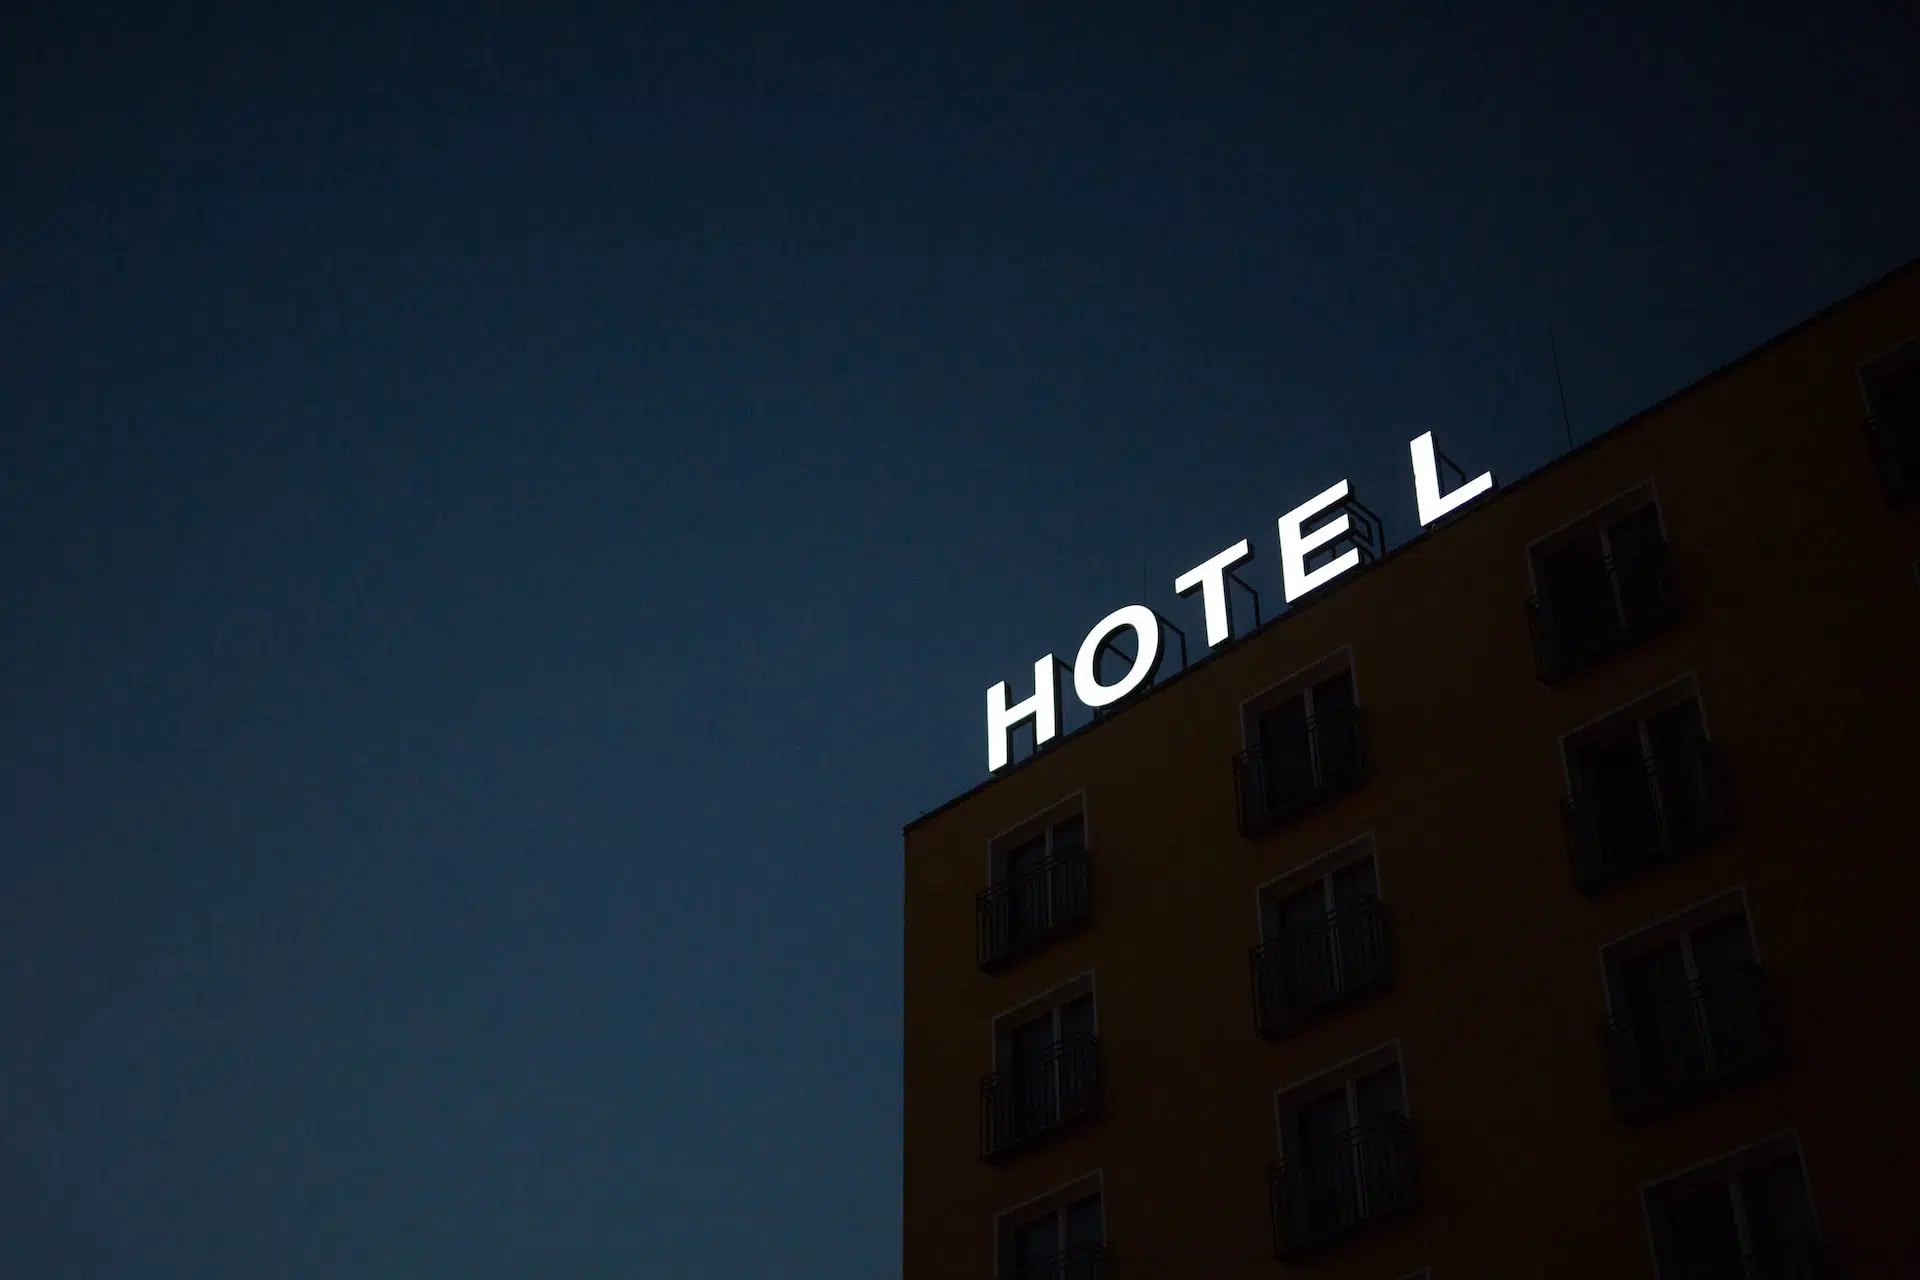 A Phishing Campaign Targeting Hotels and Travel Companies Detected